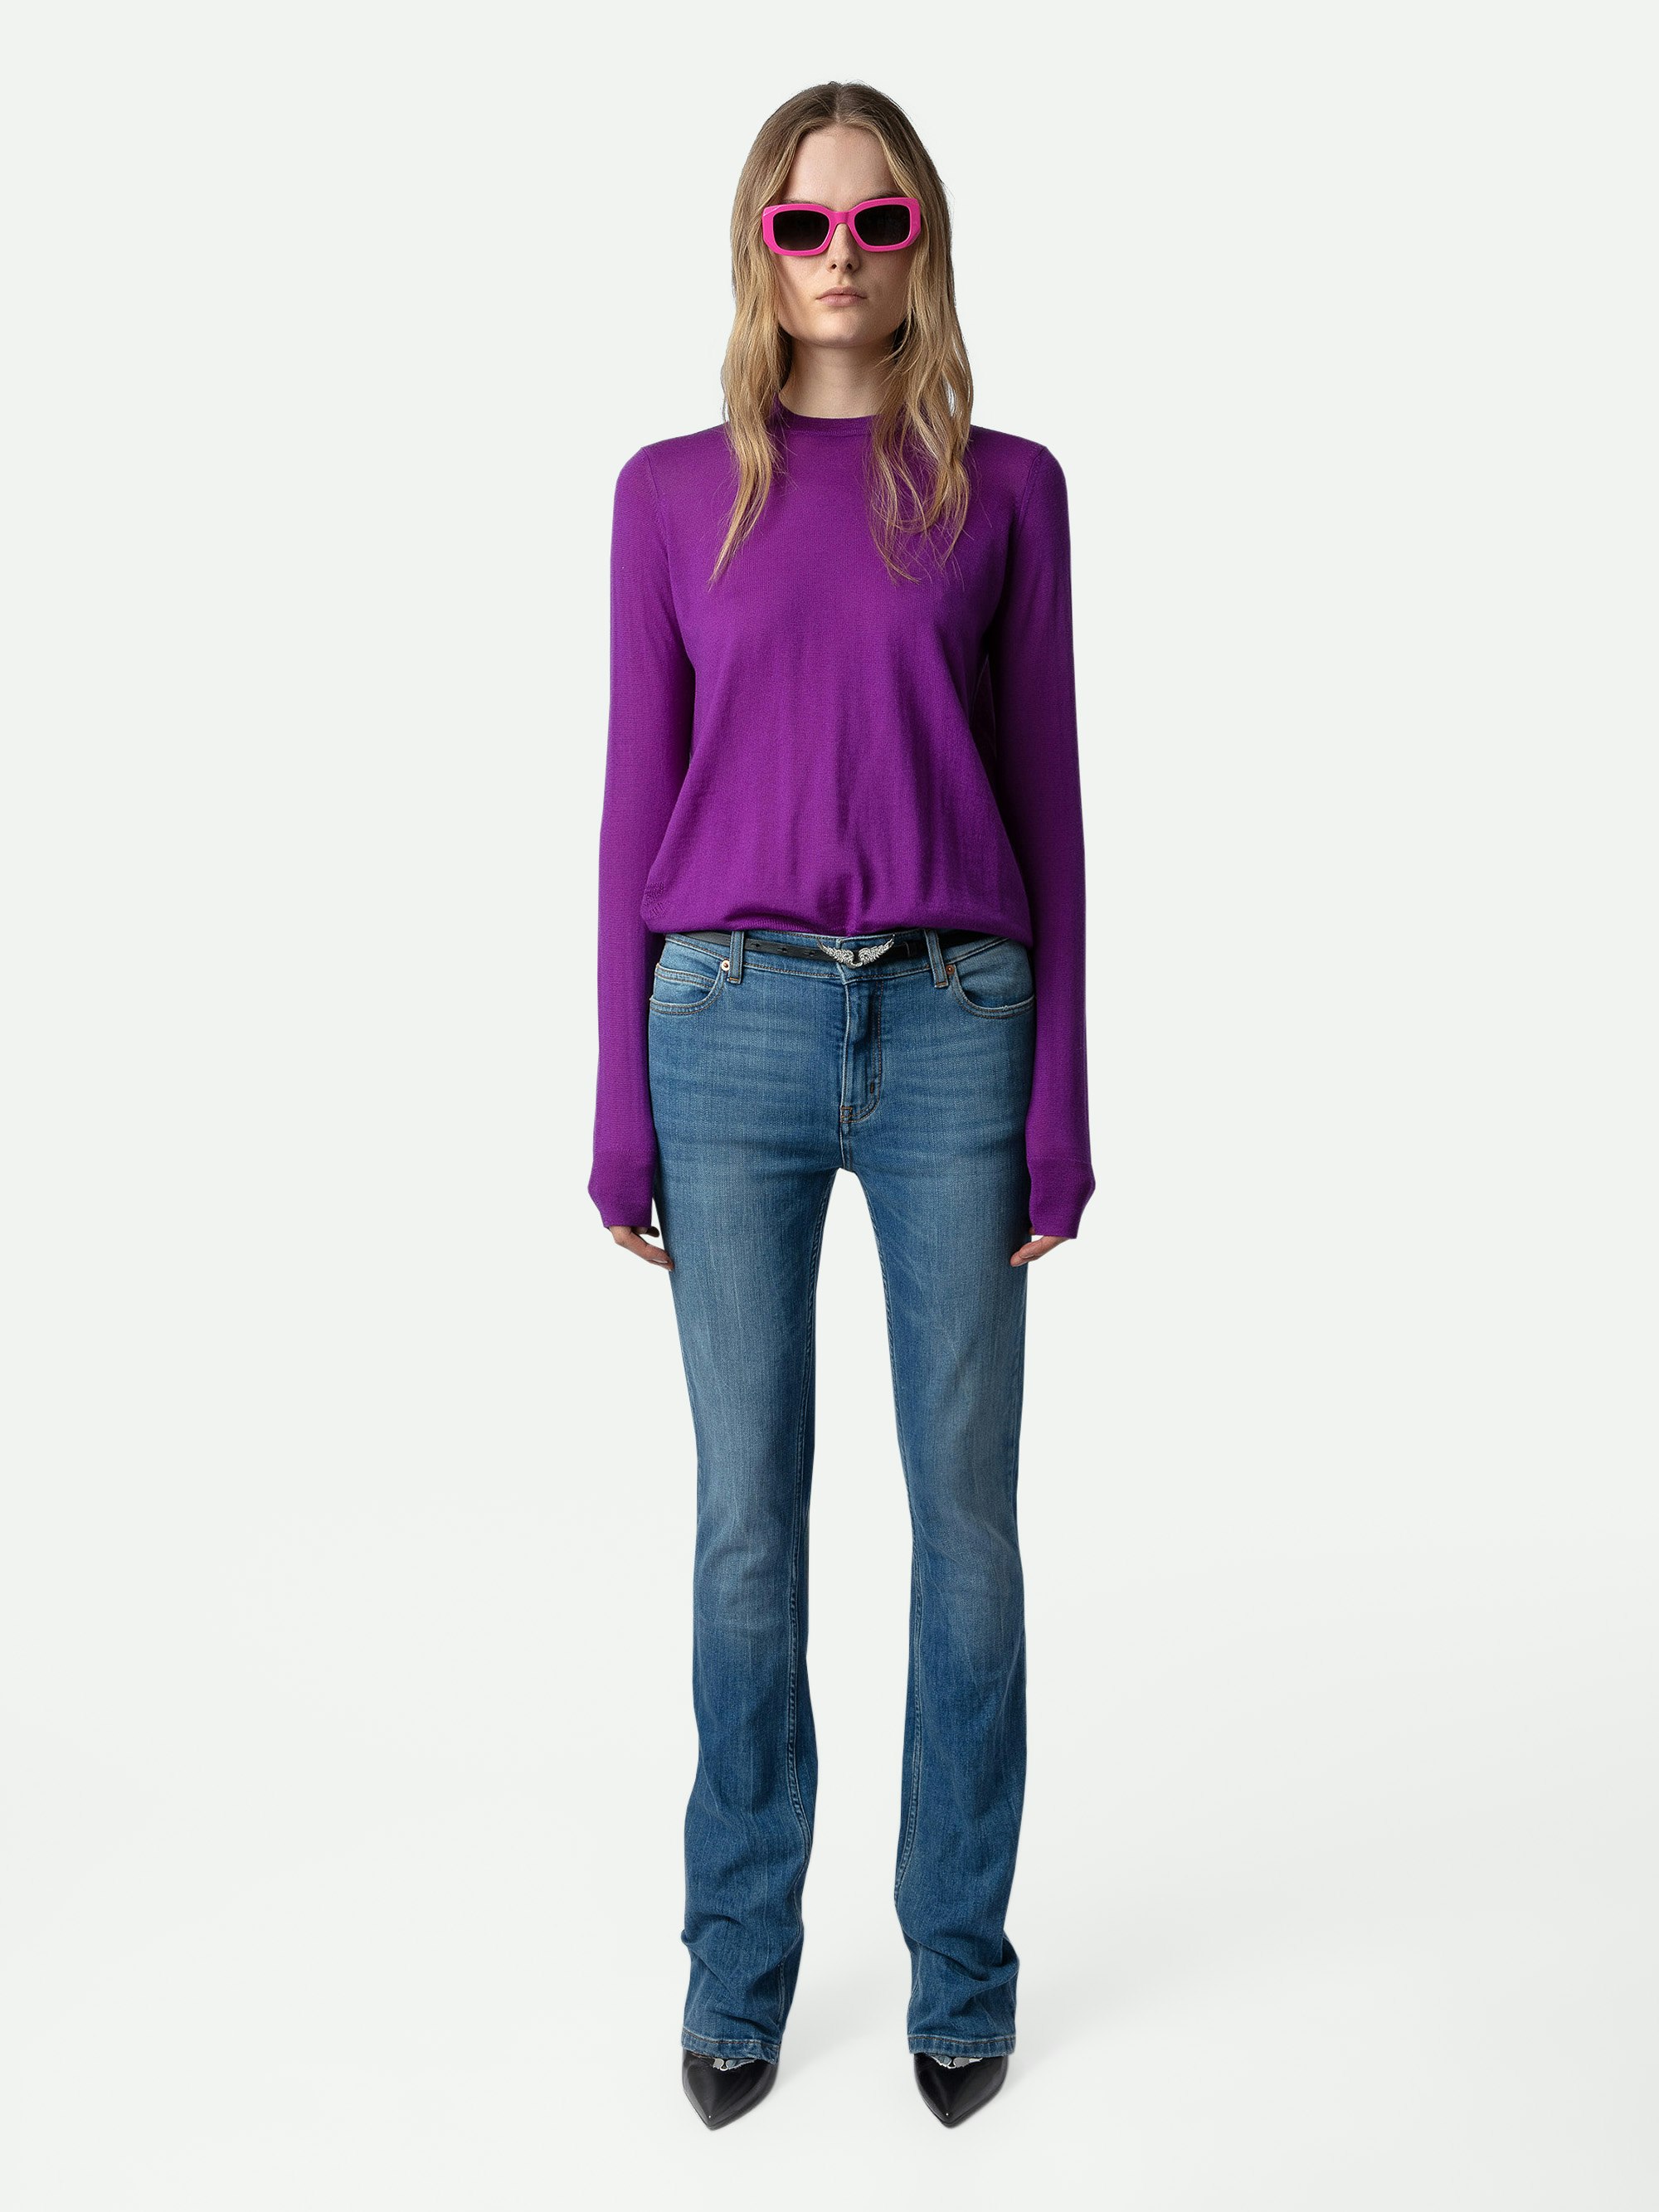 Emma Jumper 100% Merino Wool - Purple 100% merino wool round-neck jumper with long sleeves and open crossover back.